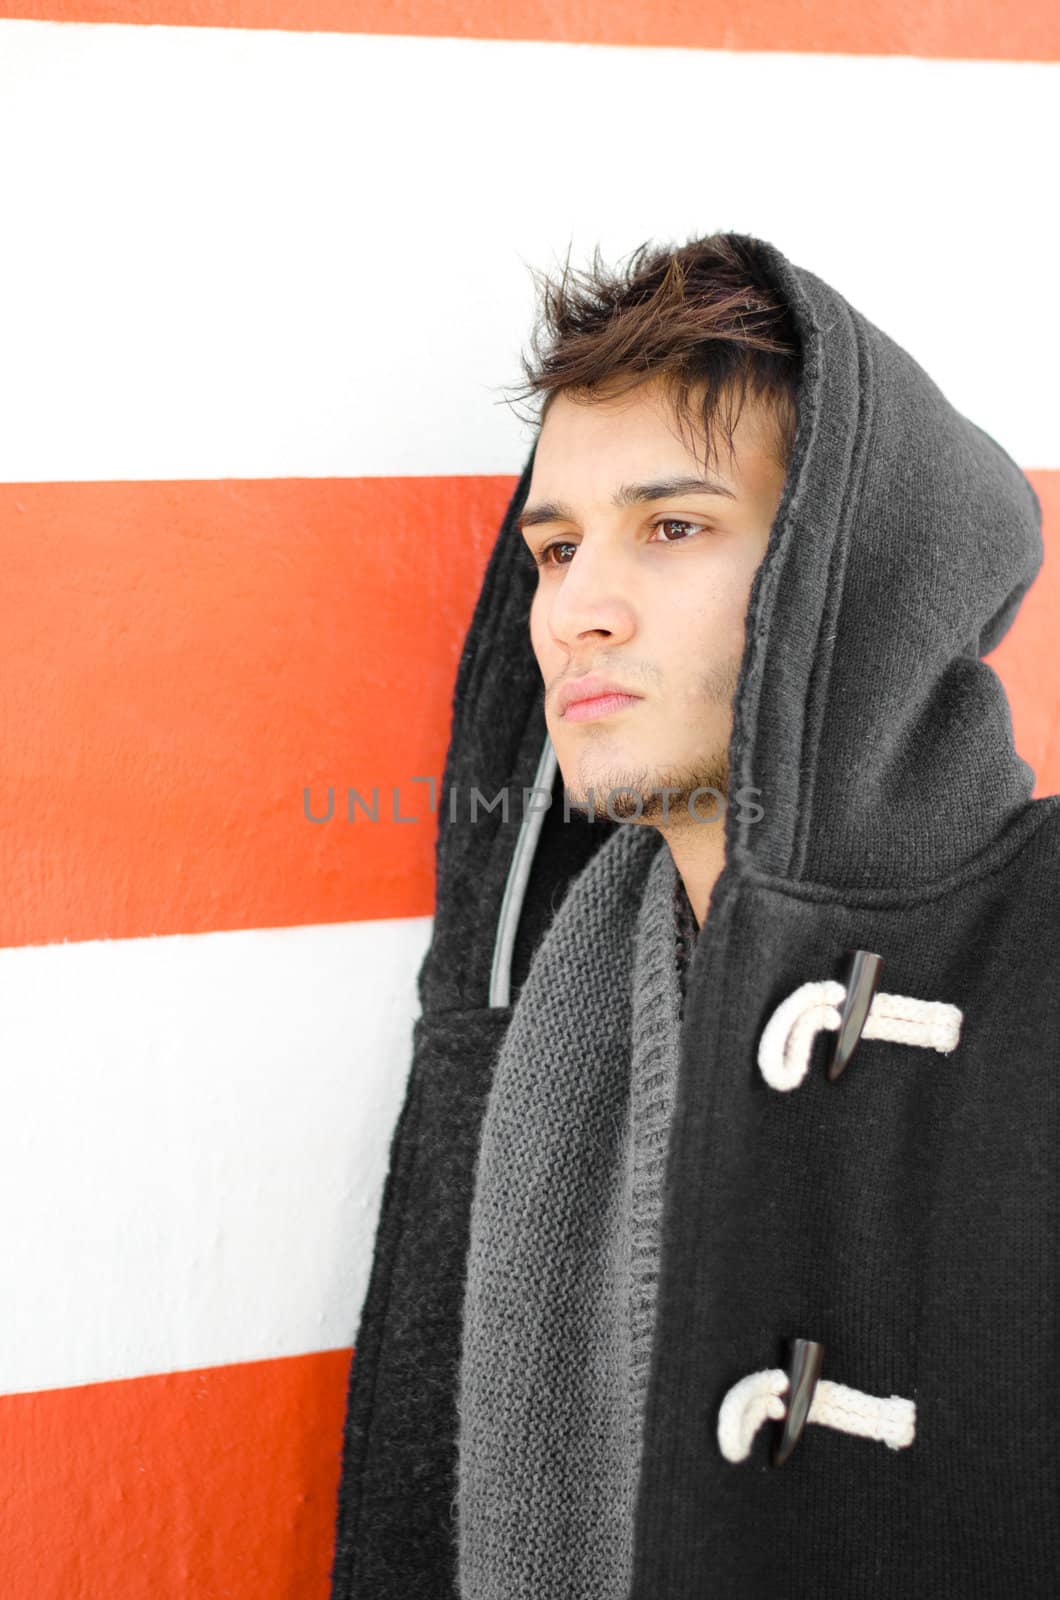 Attractive young man in hoodie against white and orange striped wall